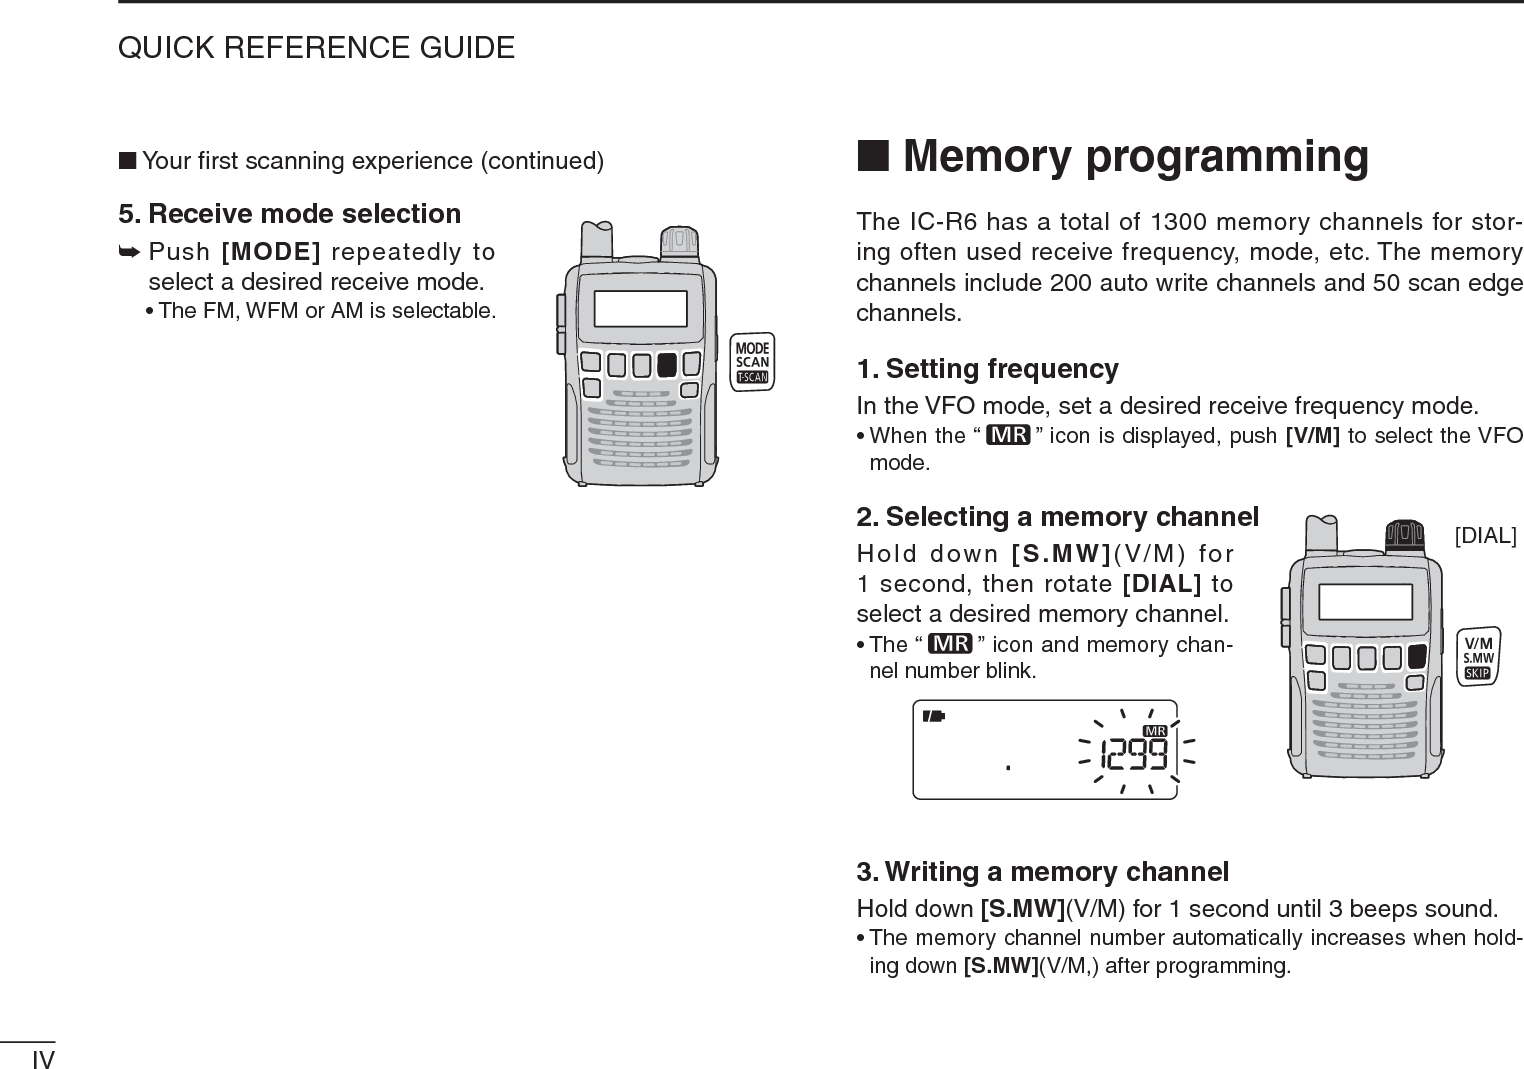 IVQUICK REFERENCE GUIDEN Your ﬁrst scanning experience (continued)5. Receive mode selection±Push [MODE] repeatedly to select a desired receive mode.• The FM, WFM or AM is selectable.N Memory programmingThe IC-R6 has a total of 1300 memory channels for stor-ing often used receive frequency, mode, etc. The memory channels include 200 auto write channels and 50 scan edge channels.1. Setting frequencyIn the VFO mode, set a desired receive frequency mode.• When the “ ” icon is displayed, push [V/M] to select the VFO mode.2. Selecting a memory channelHold down [S.MW](V/M) for 1 second, then rotate [DIAL] to select a desired memory channel.• The “ ” icon and memory chan-nel number blink.3. Writing a memory channelHold down [S.MW](V/M) for 1 second until 3 beeps sound.• The memory channel number automatically increases when hold-ing down [S.MW](V/M,) after programming.[DIAL]